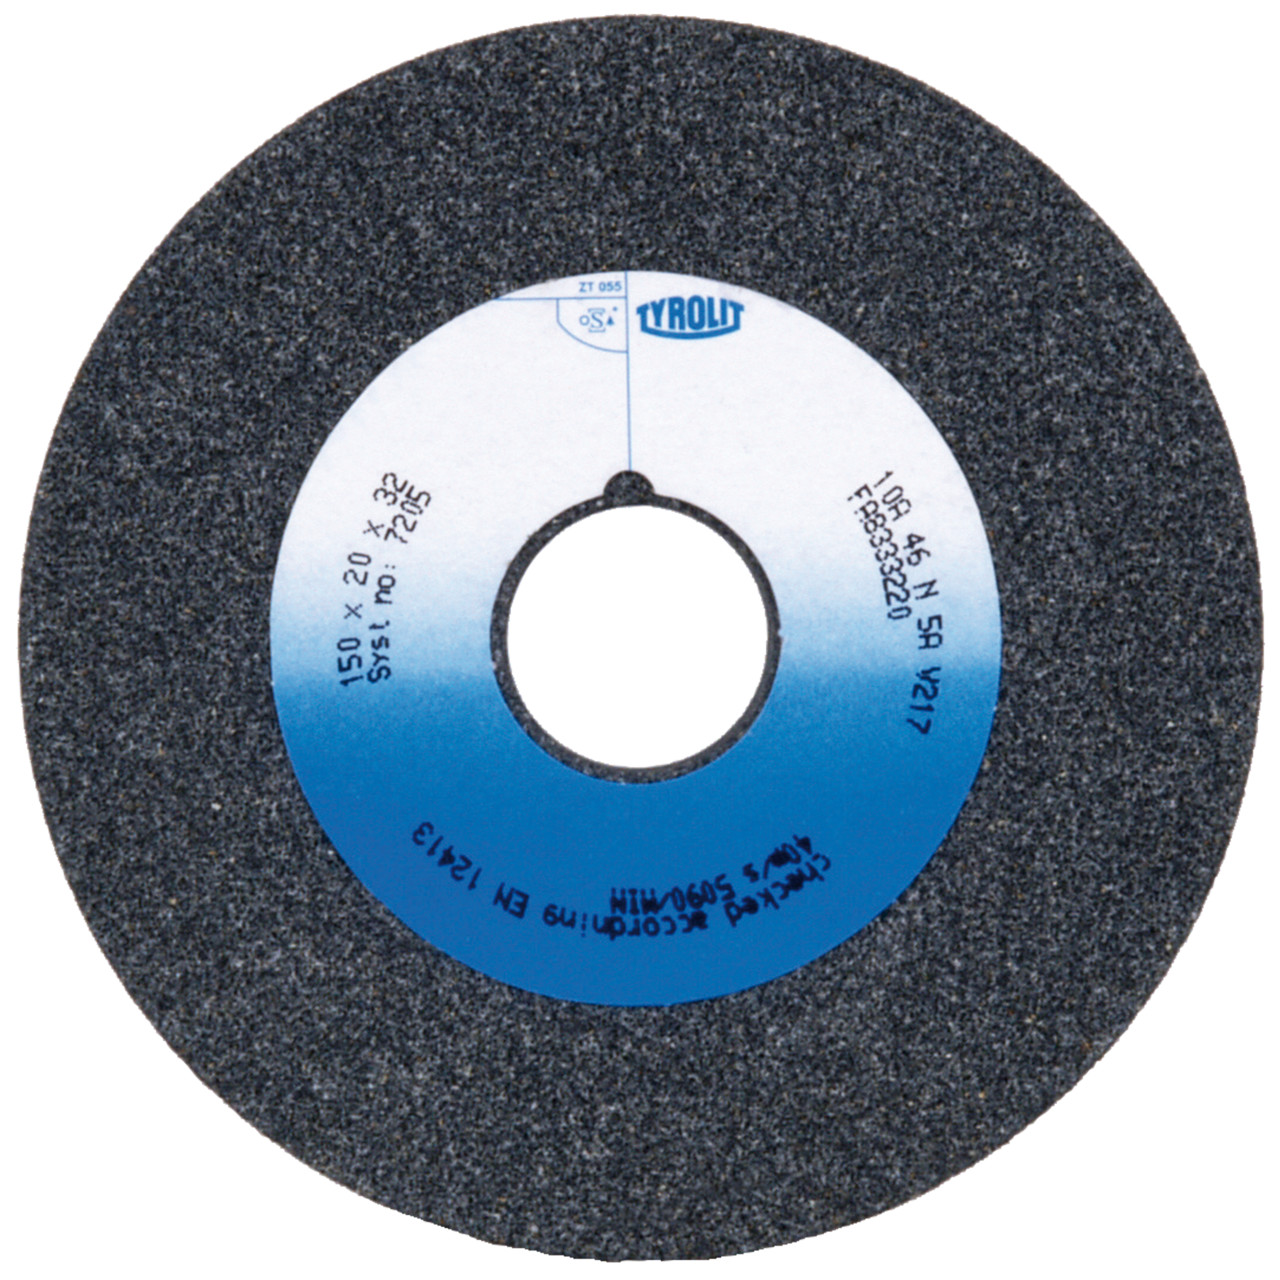 Tyrolit Conventional ceramic grinding discs DxDxH 300x40x76 For unalloyed and low-alloy steels, shape: 1, Art. 34983